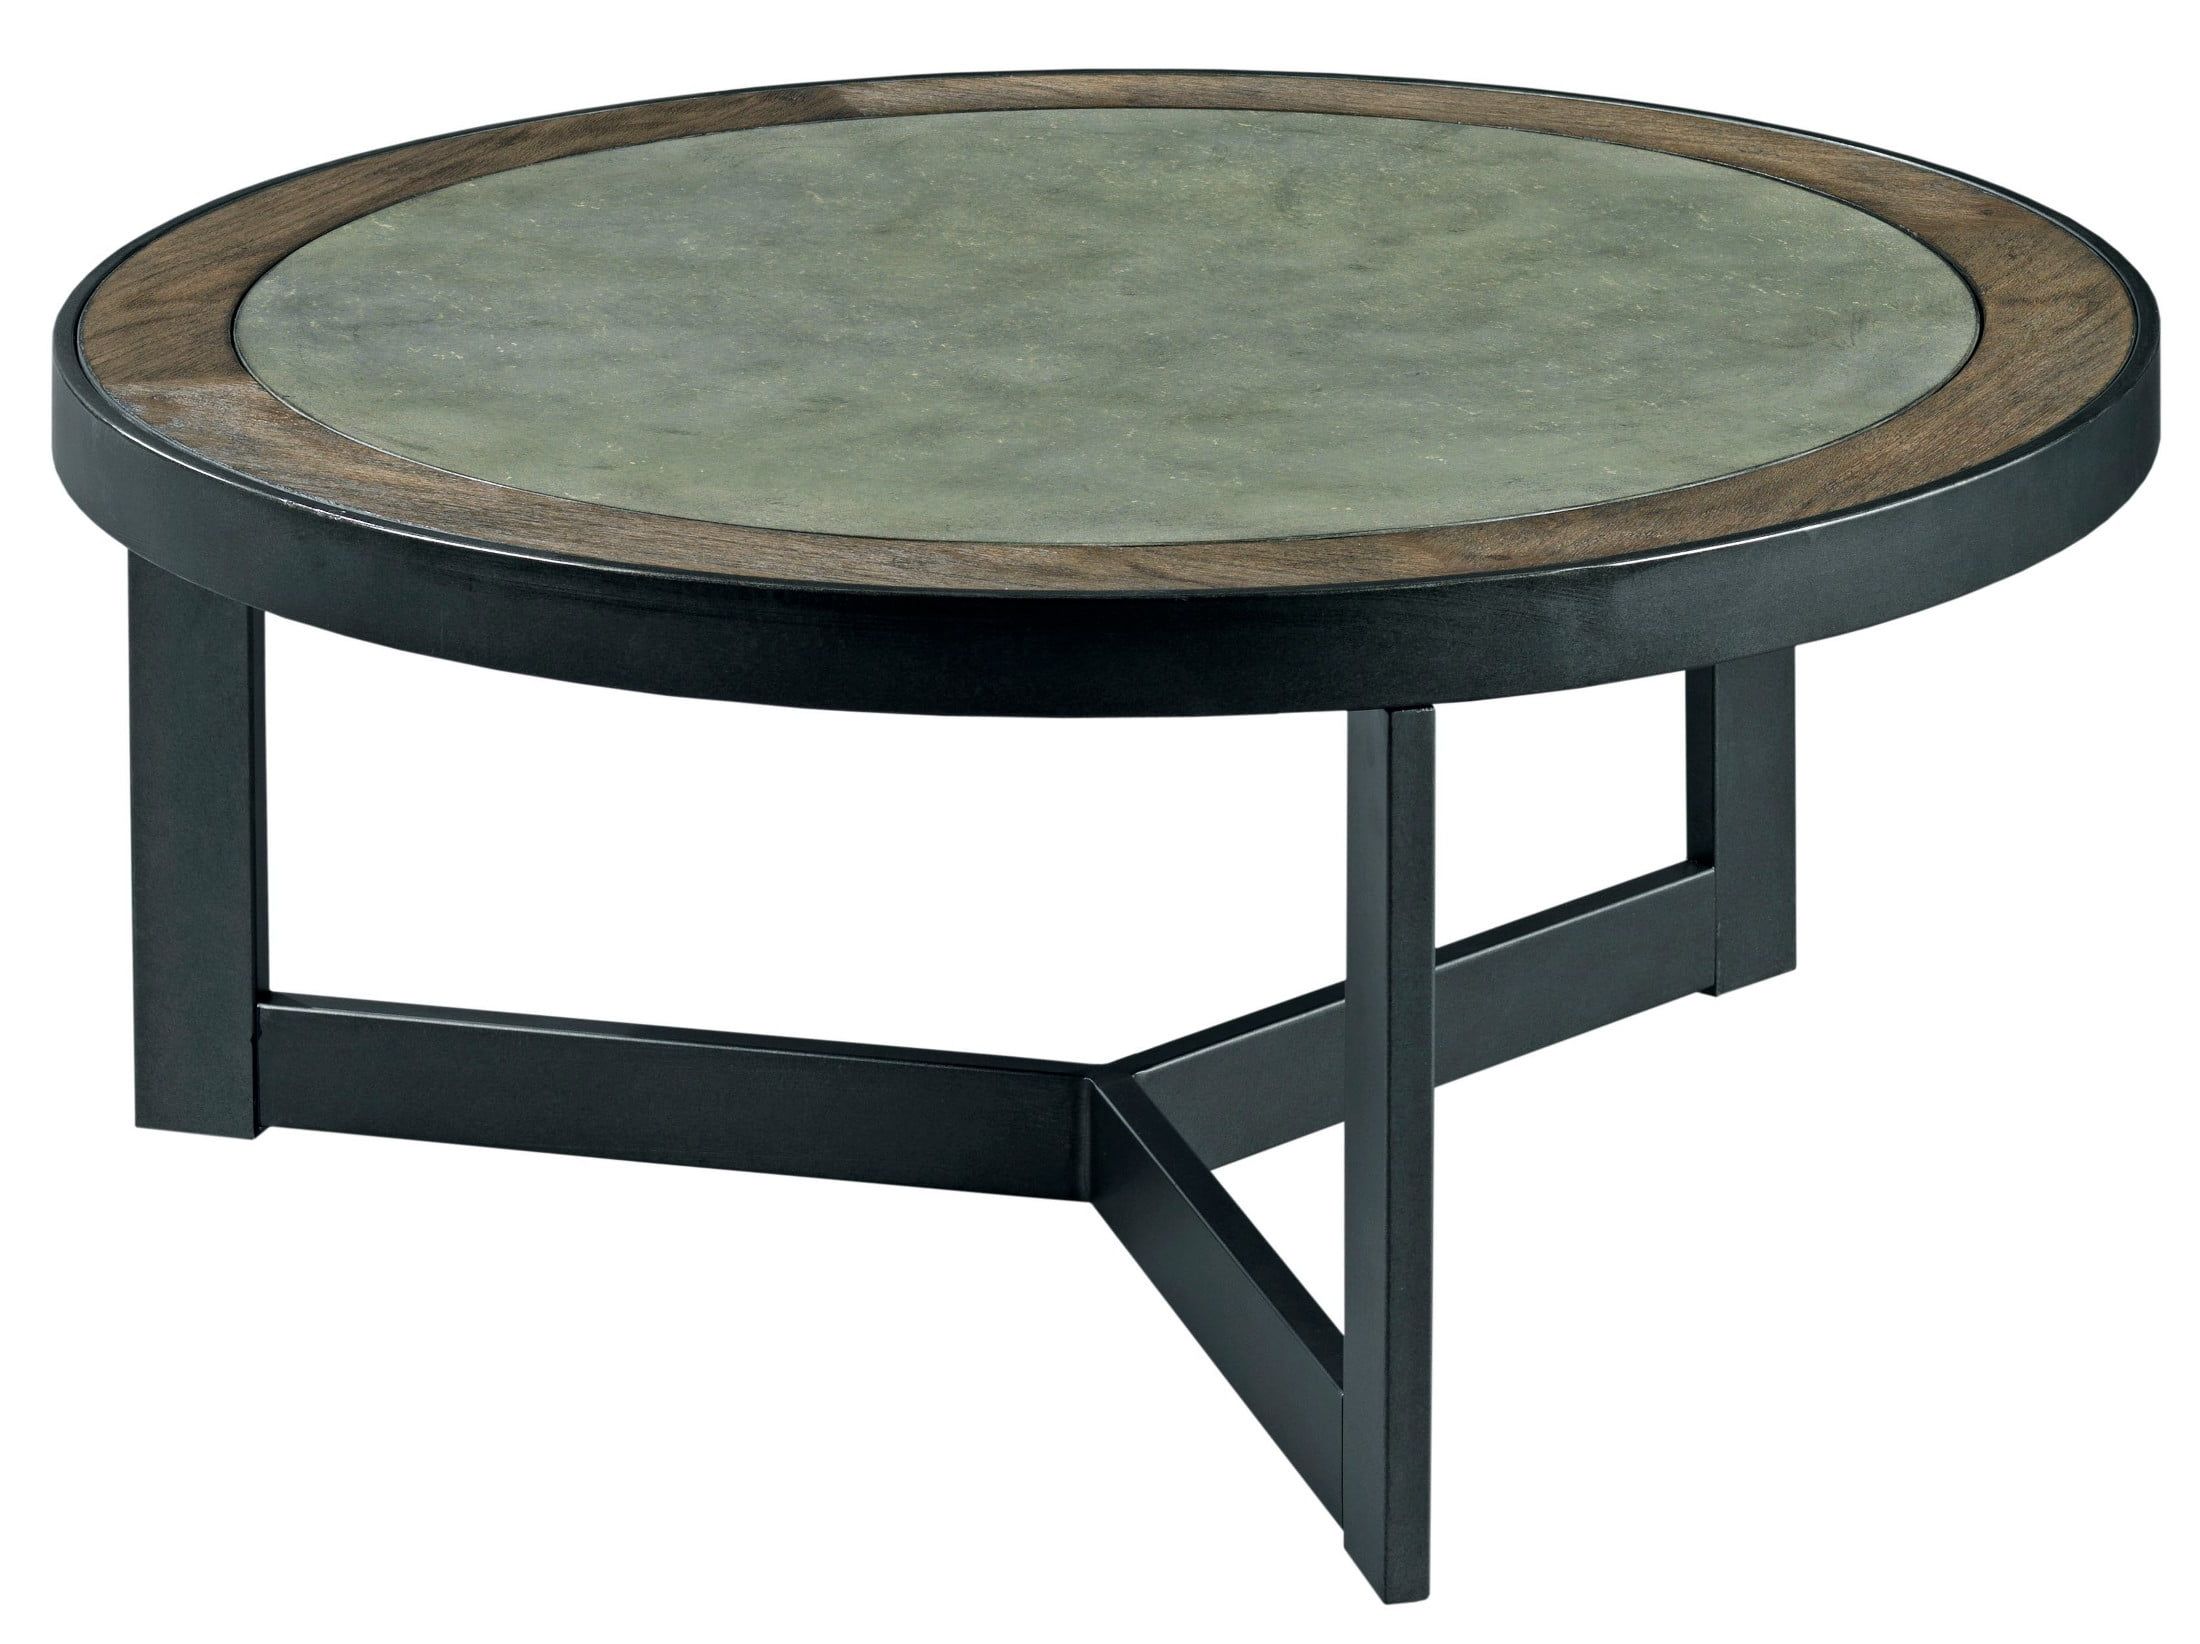 Graystone Dark Oak Round Cocktail Table From Hammary In Preferred Barnside Round Cocktail Tables (Gallery 16 of 20)